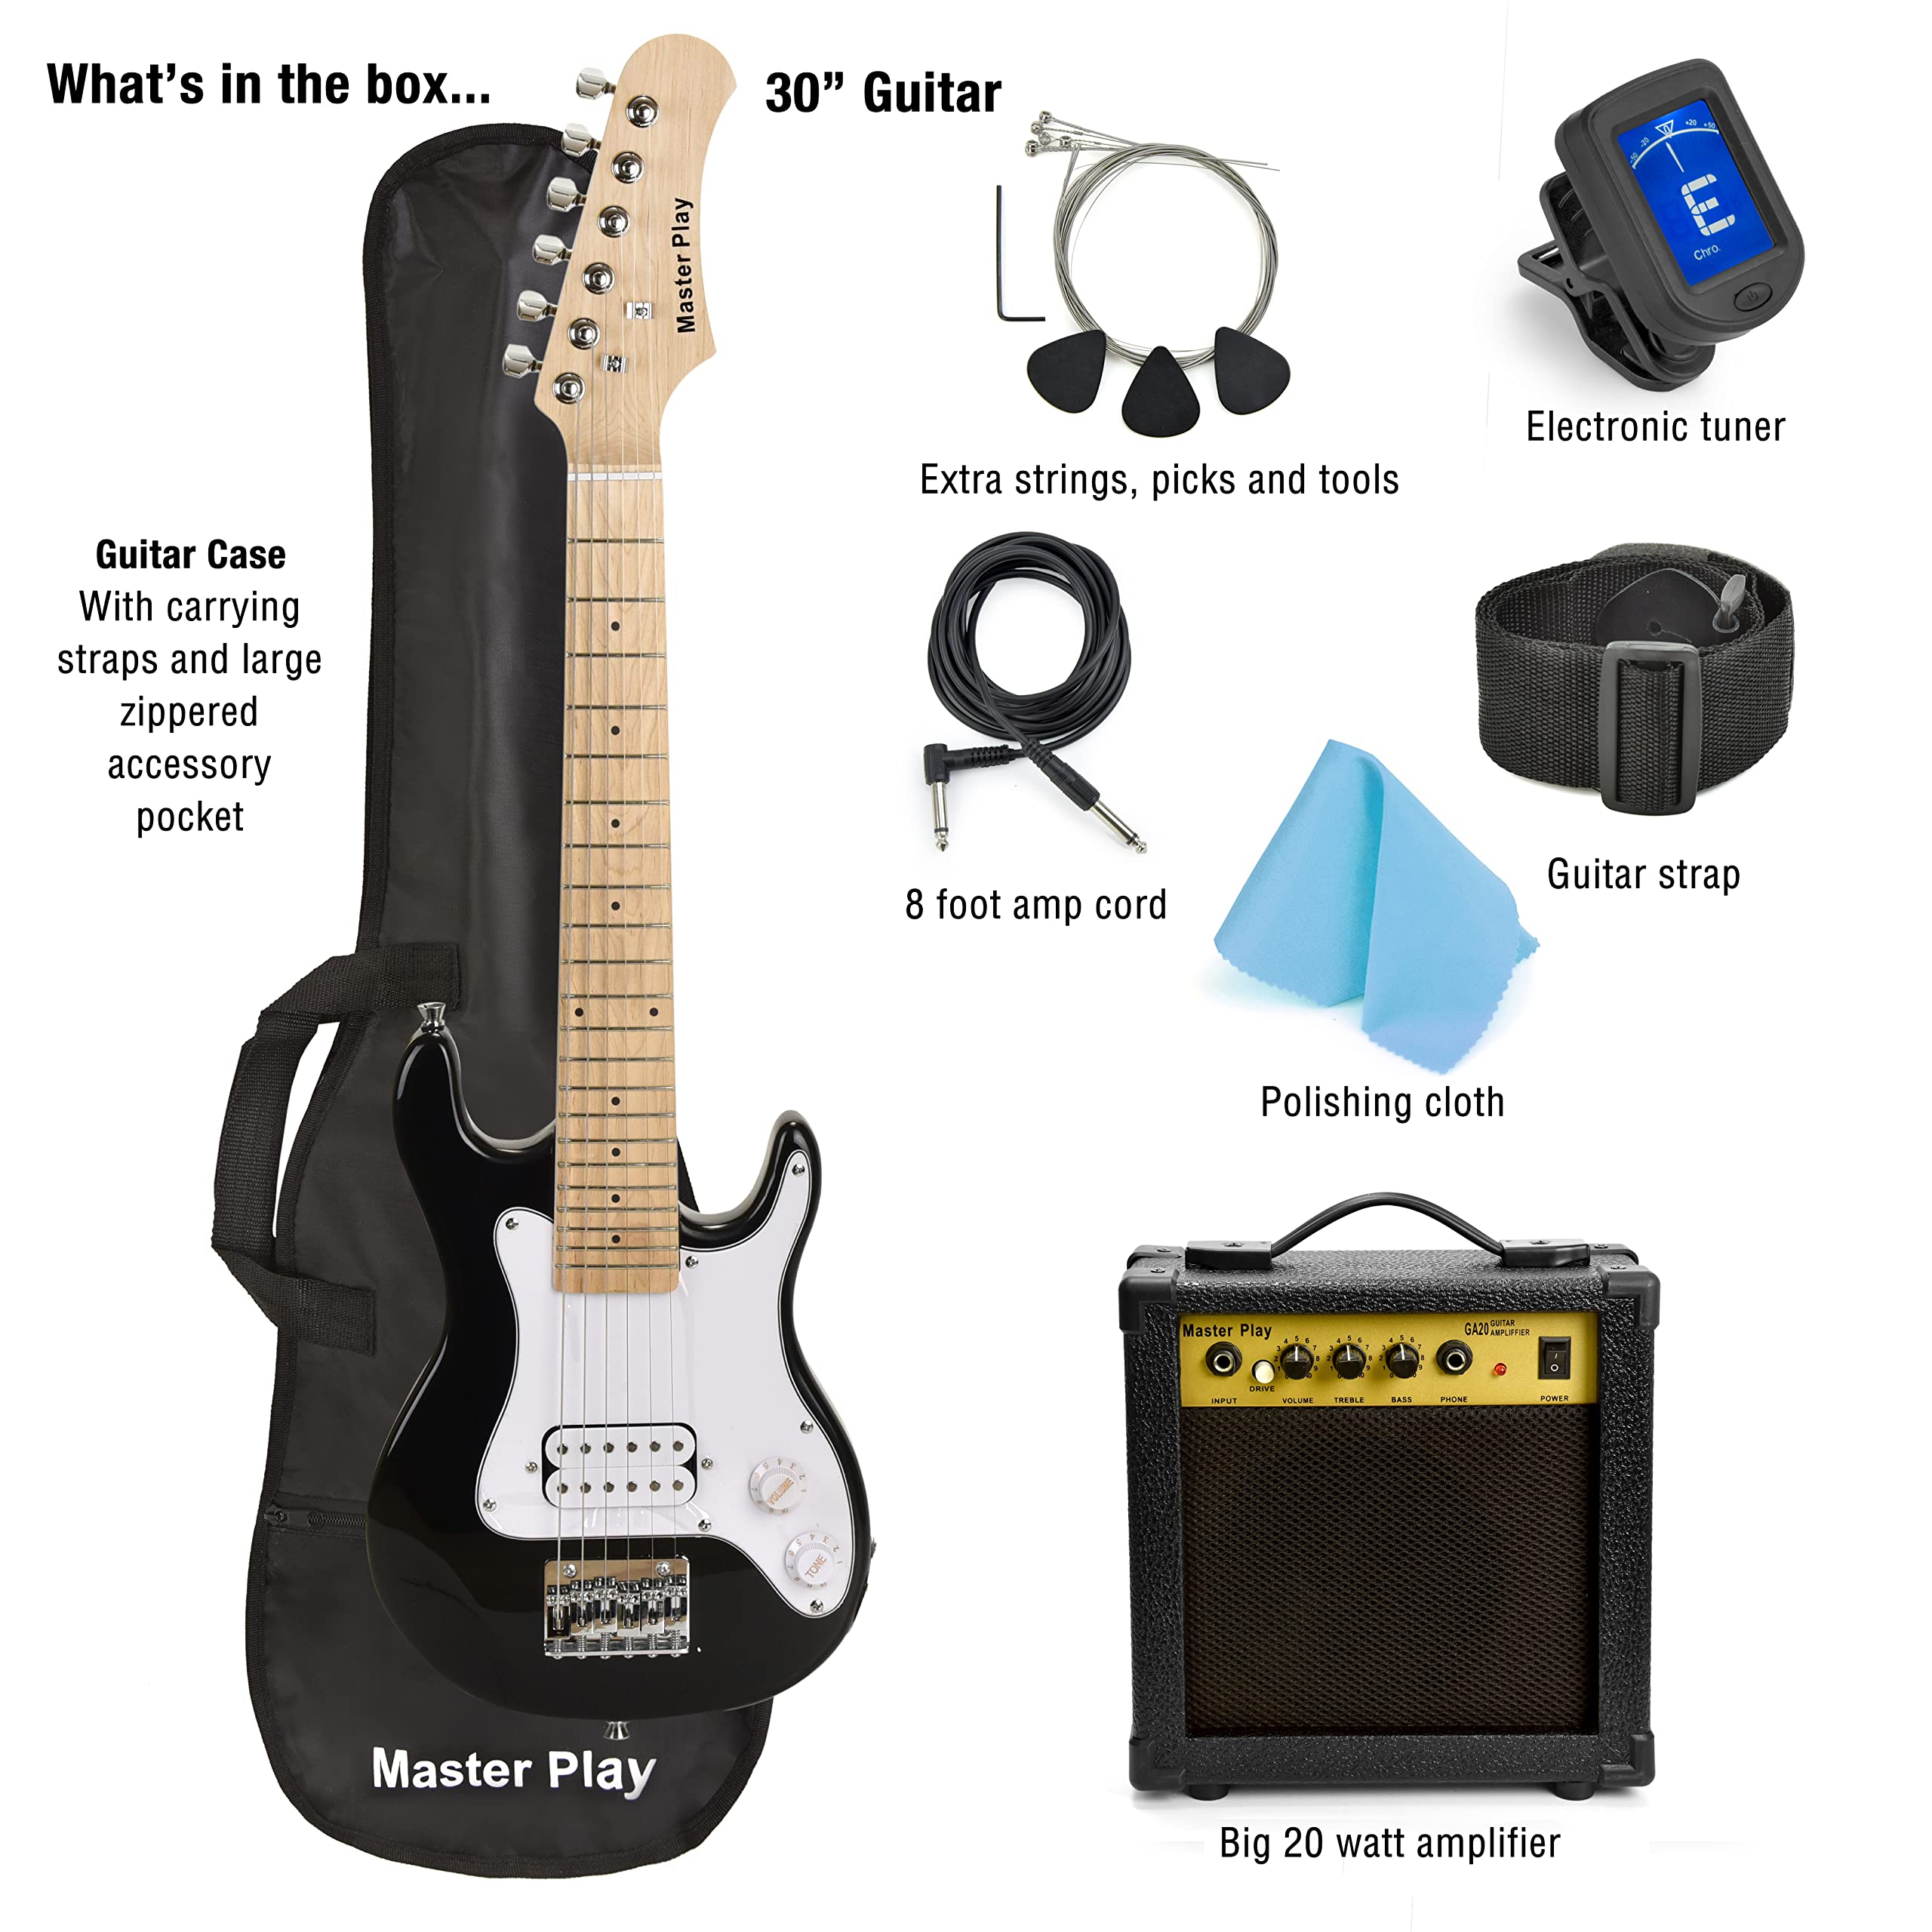 Master Play 30 Inch Electric Guitar,For Kids/beginner With Complete Starter Kit, 20 Watt Amp, 6 Extra String, Picks, Gig Bag, Shoulder Strap, Digital tuner, Cable, Wash Cloth  - Very Good